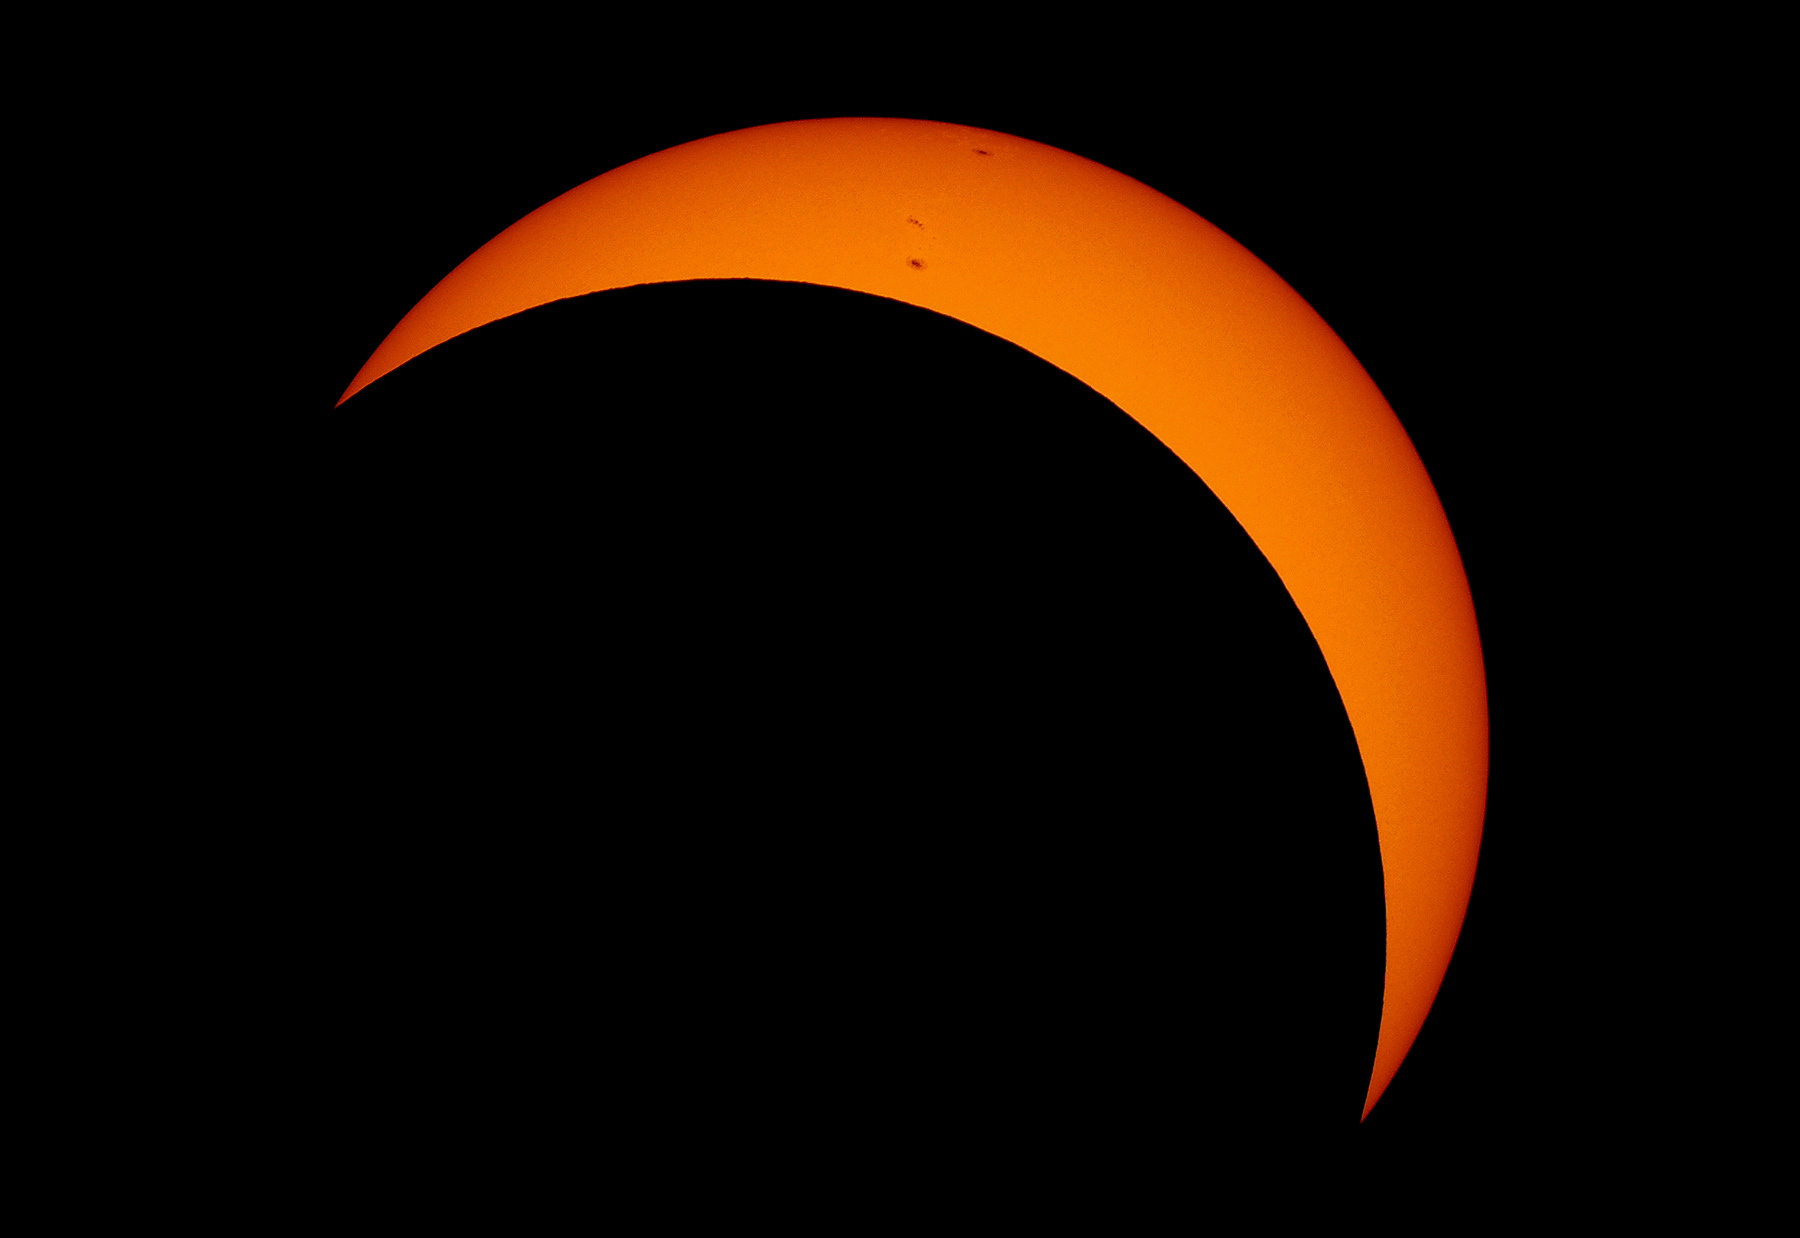 Eclipse 2017 - A30 - Partial Eclipse -10 minutes before Totality